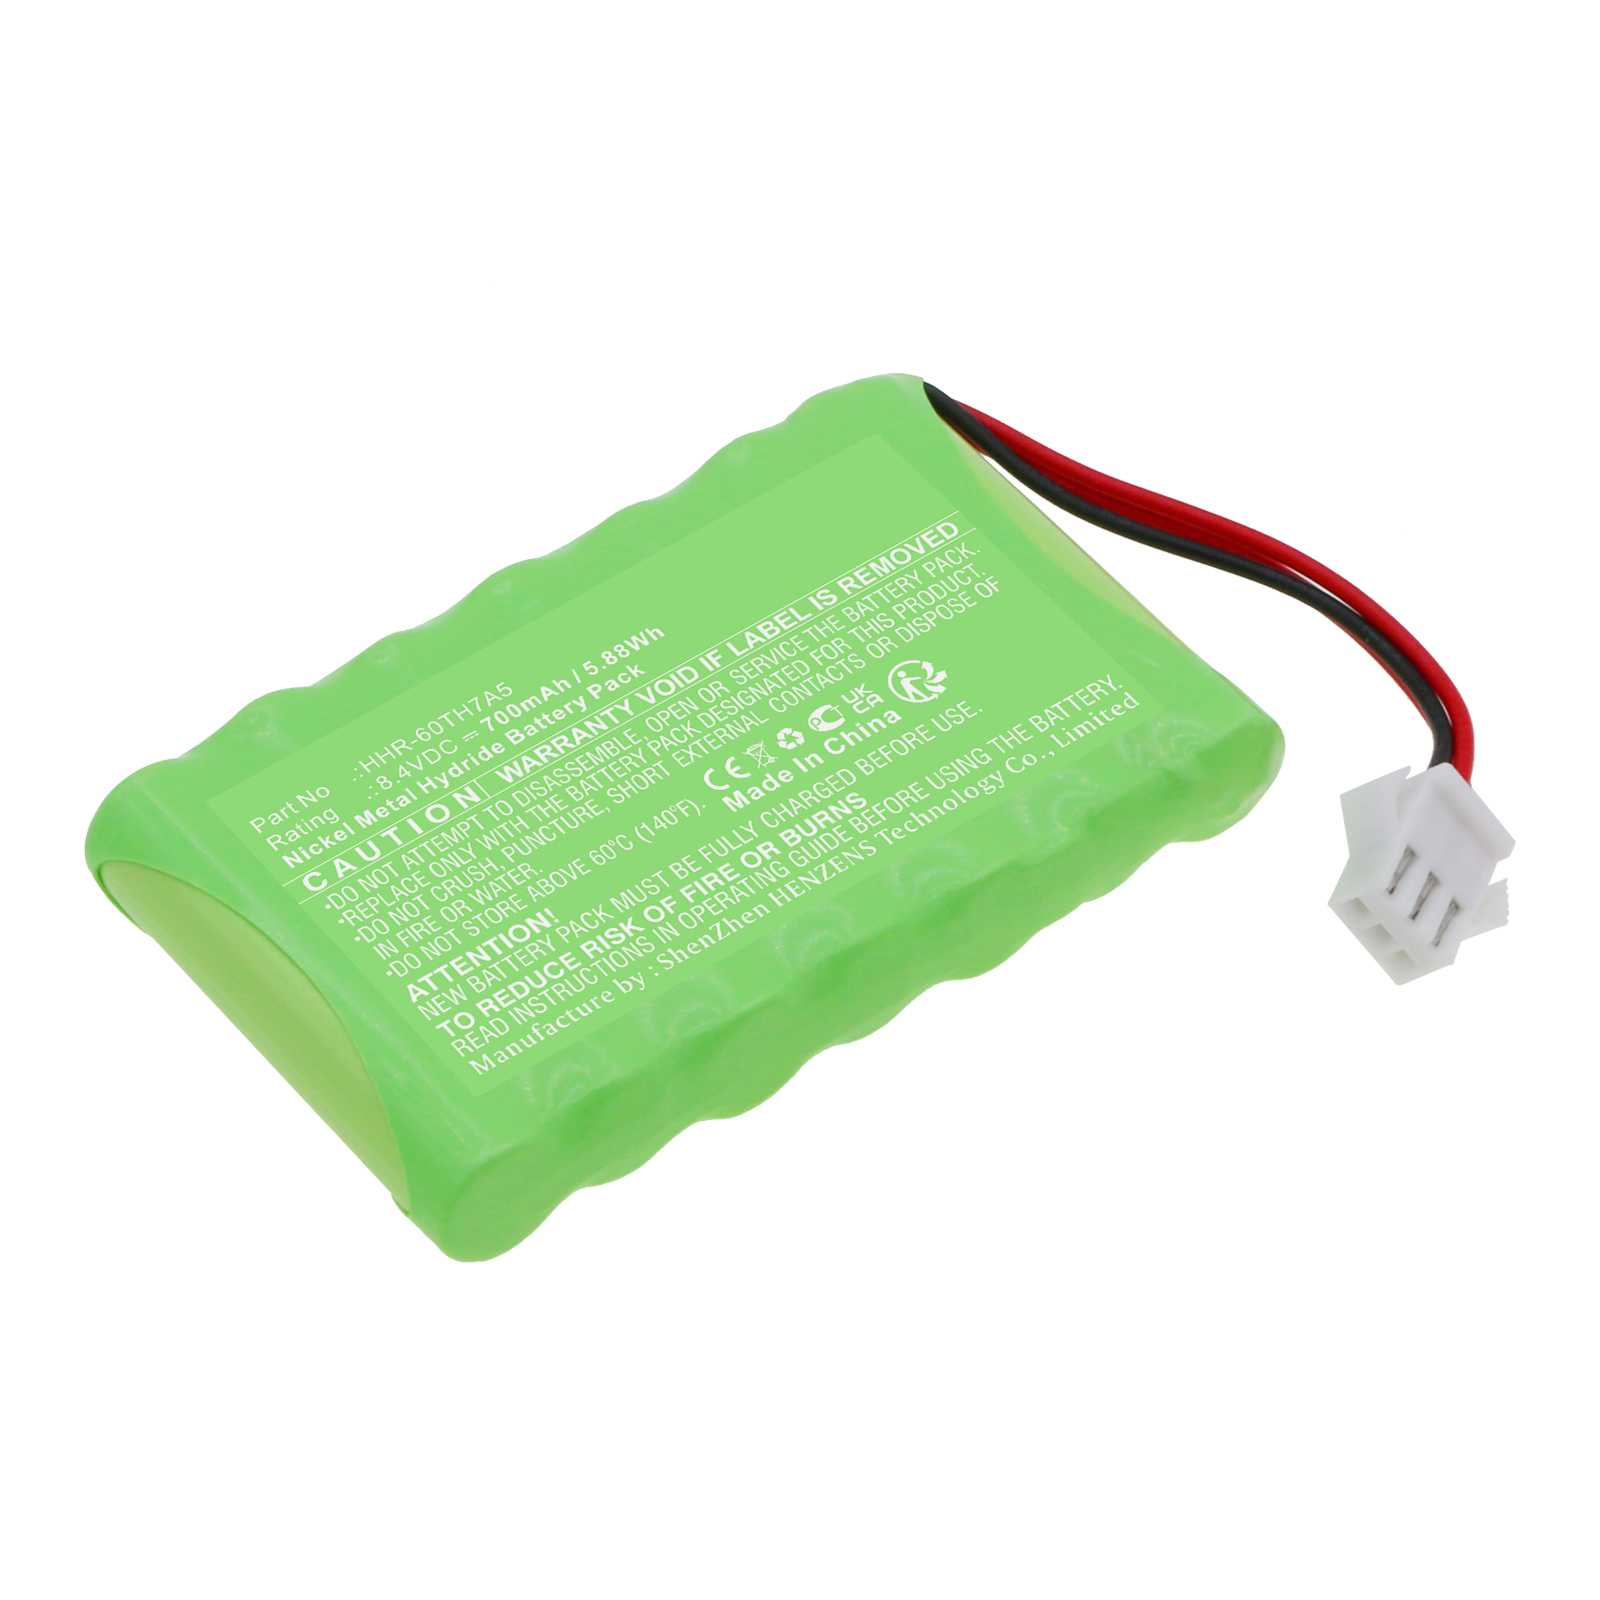 Synergy Digital Time Clock Battery, Compatible with Lathem HHR-60TH7A5 Time Clock Battery (Ni-MH, 8.4V, 700mAh)